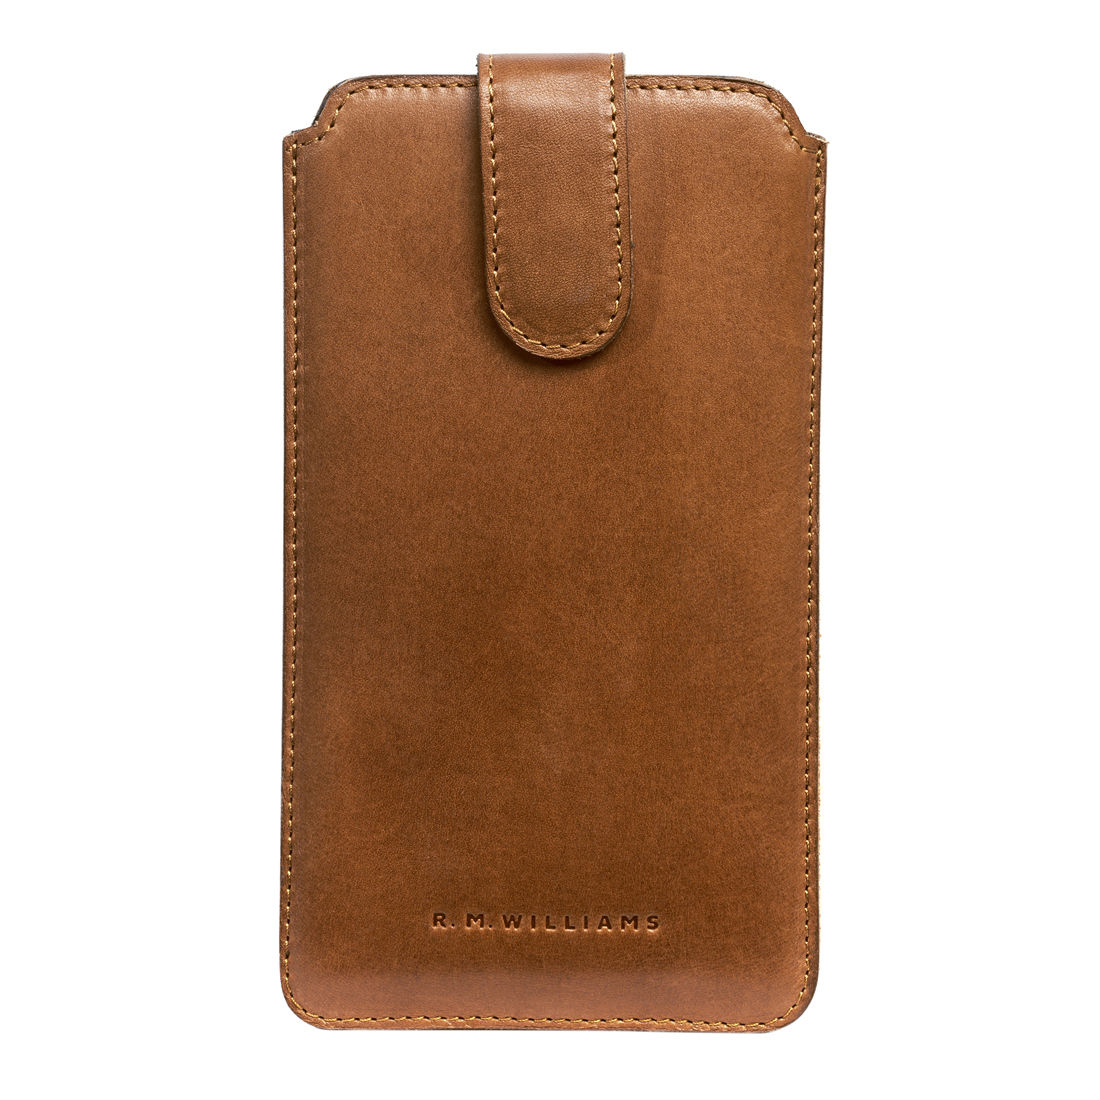 RM Williams Tan Leather iPhone 6 Case